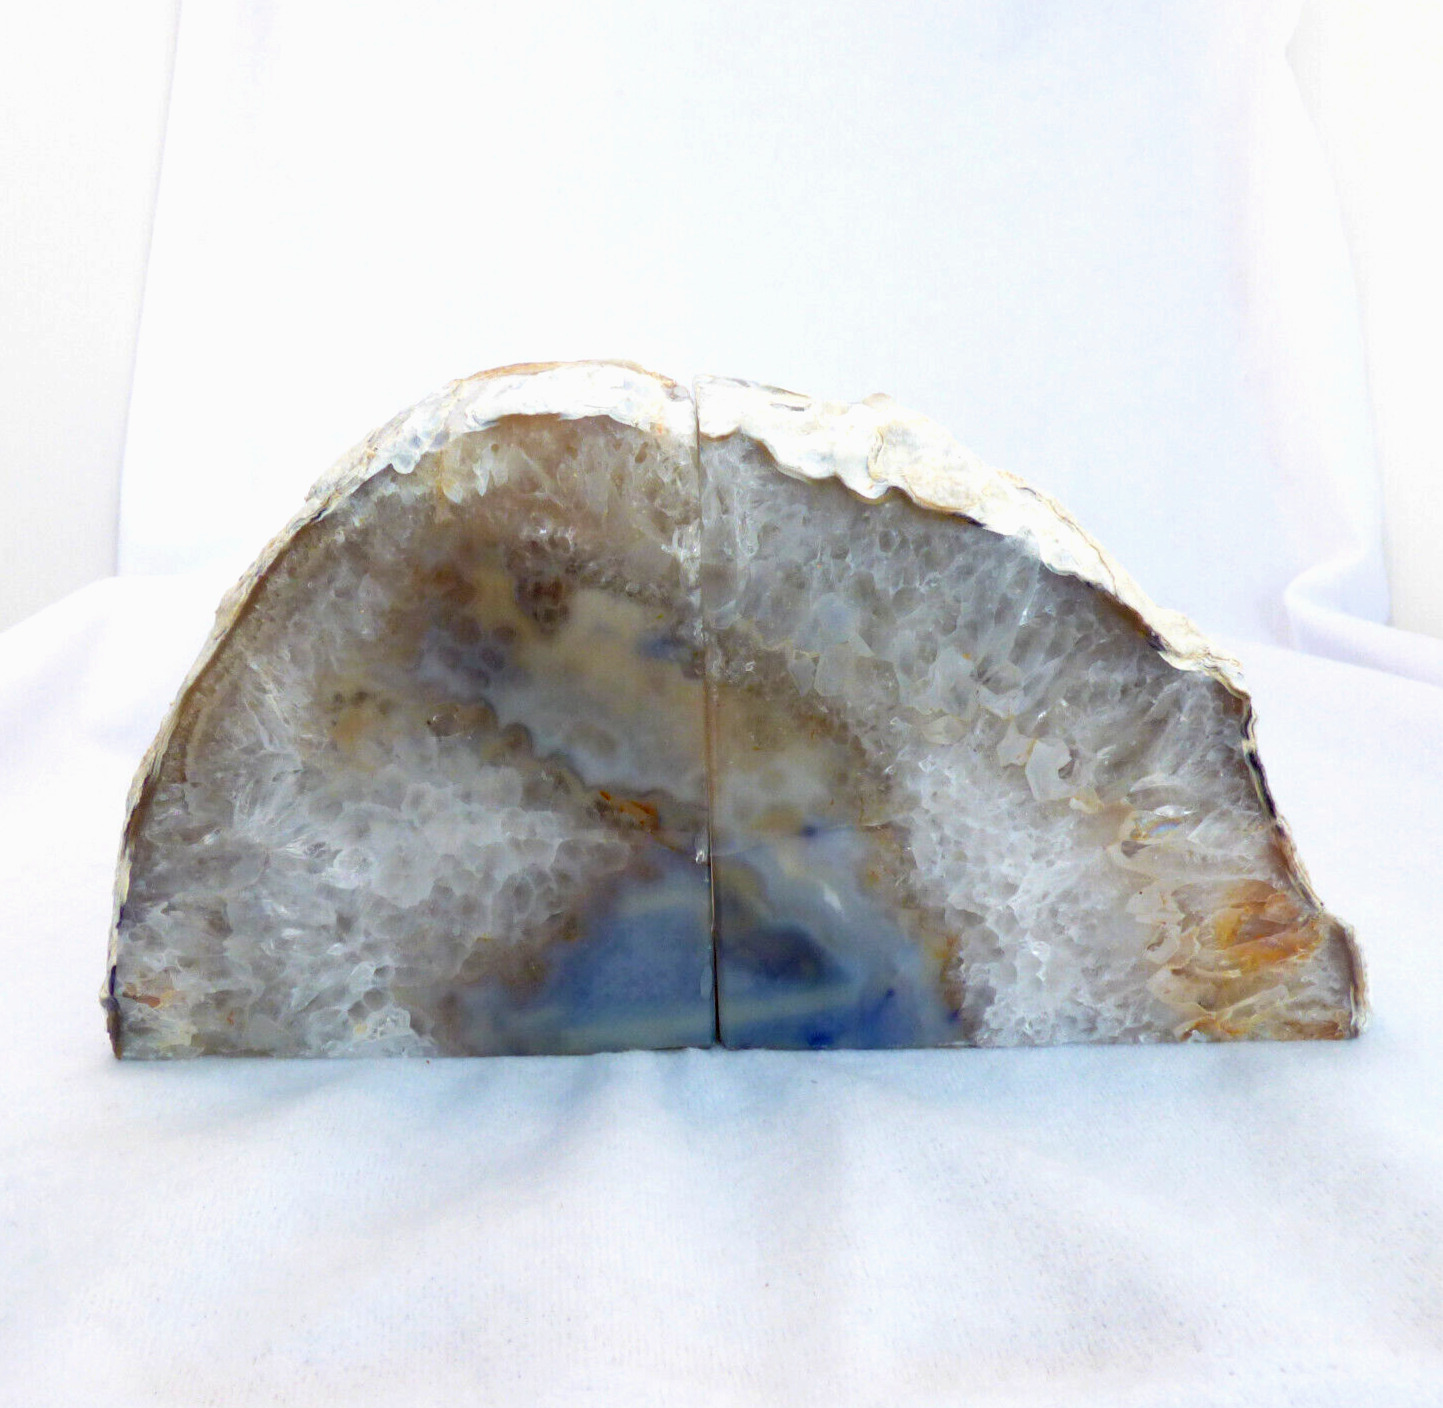 Grey Agate Bookend Set X Large Polished Geode with Quartz Crystal 2134g 22cm